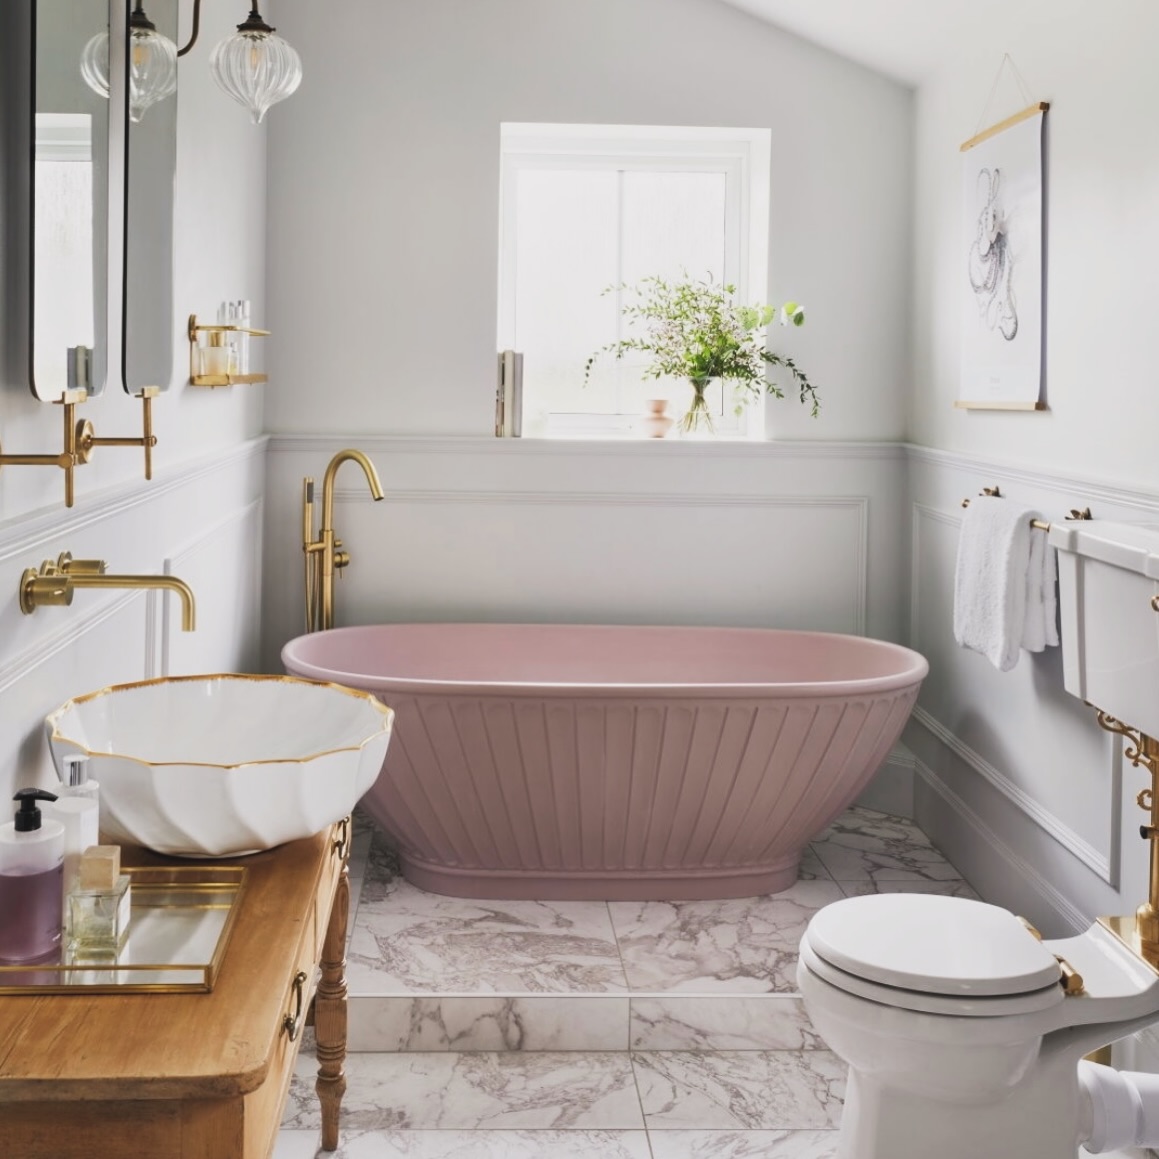 5 Top Tips for Creating a Tranquil Bathroom